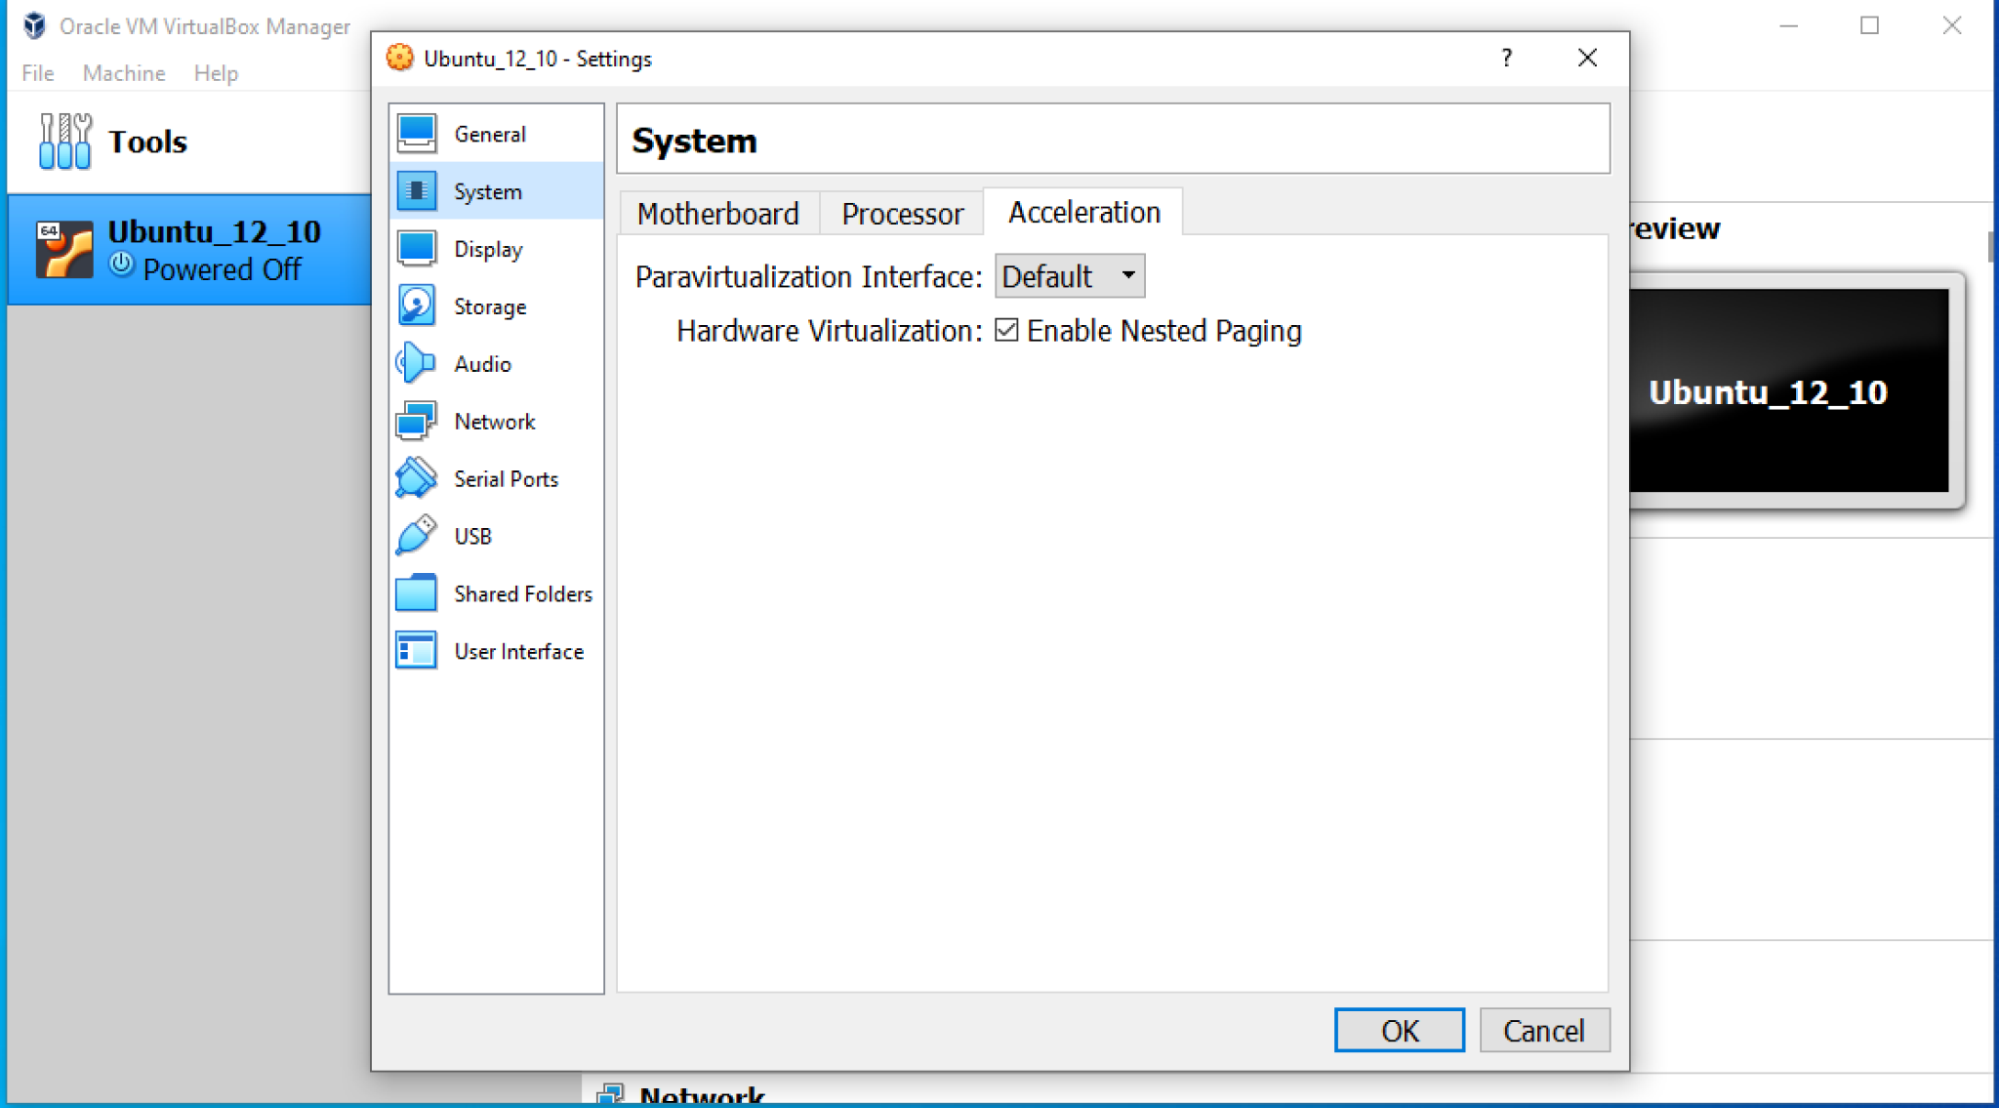 The acceleration tab insures the host machine supports virtualization by default and enables nested paging